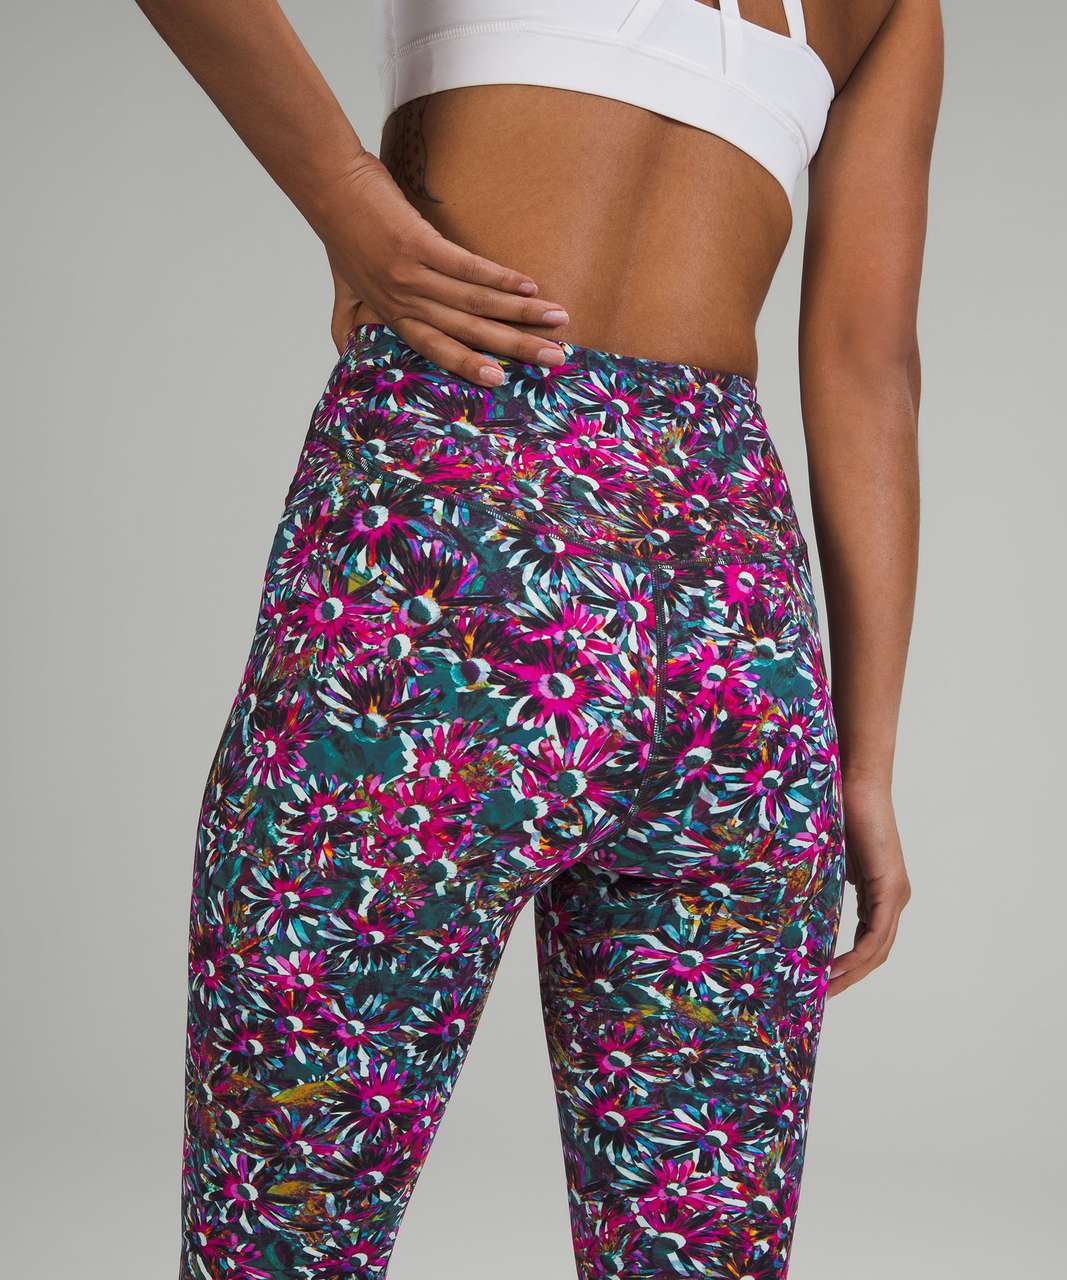 Lululemon Base Pace High-Rise Running Tight 25 - Floral Electric